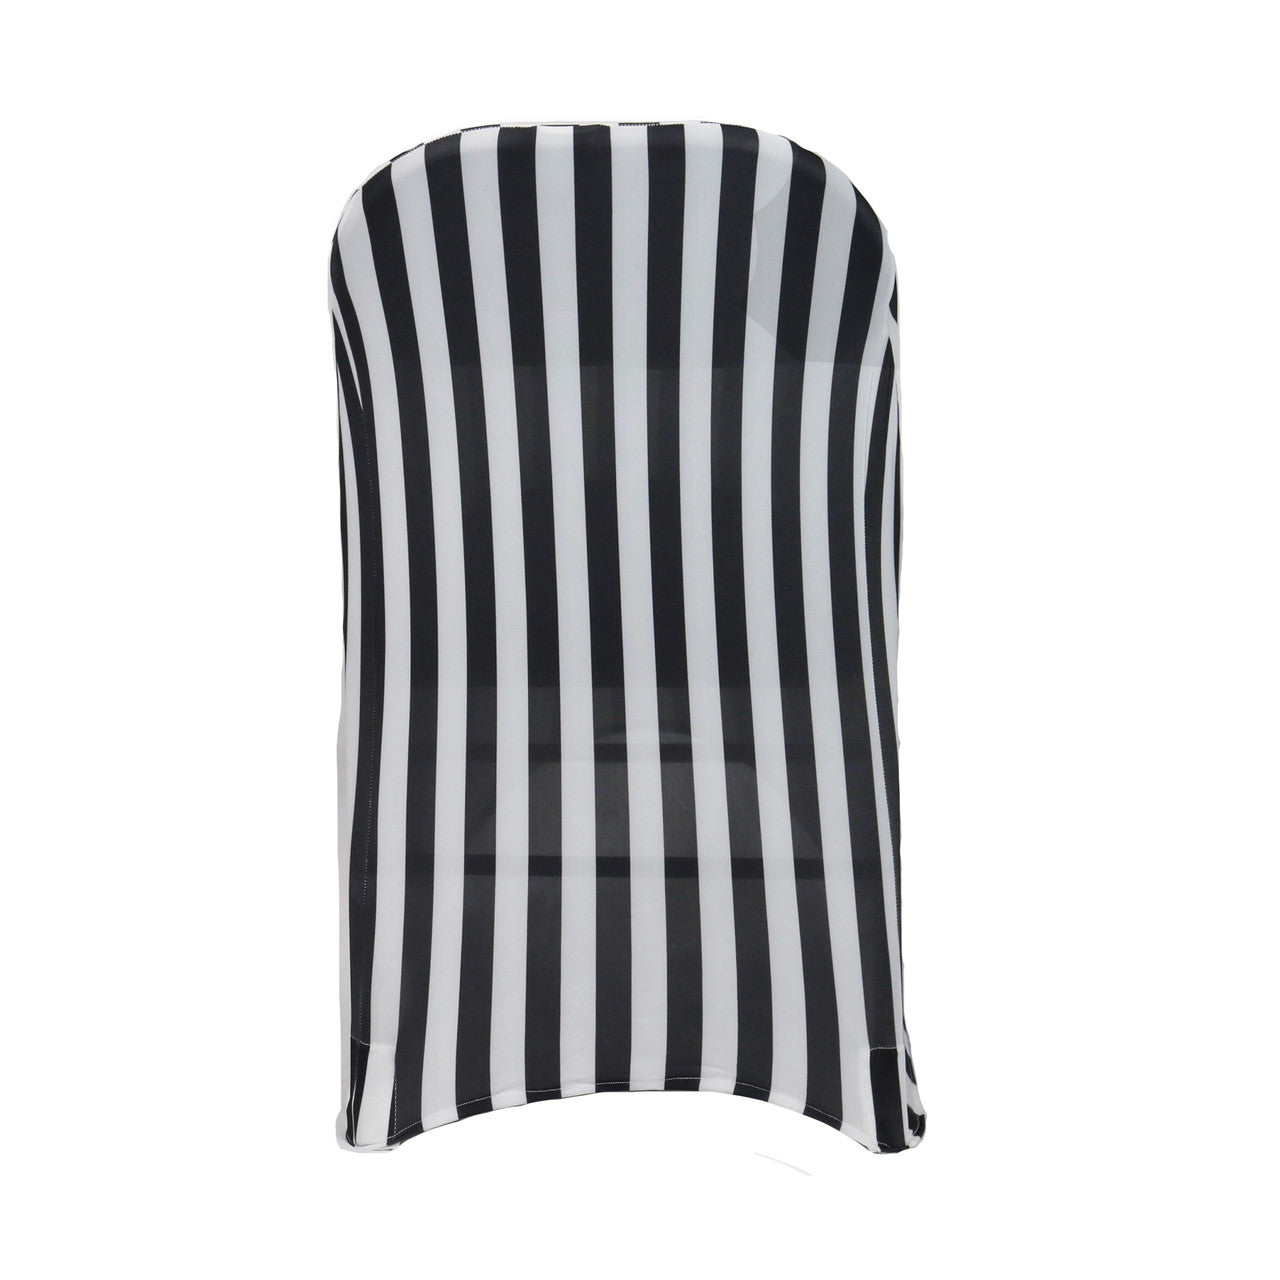 Print Spandex Folding Chair Cover in Black and White Striped – Urquid Linen